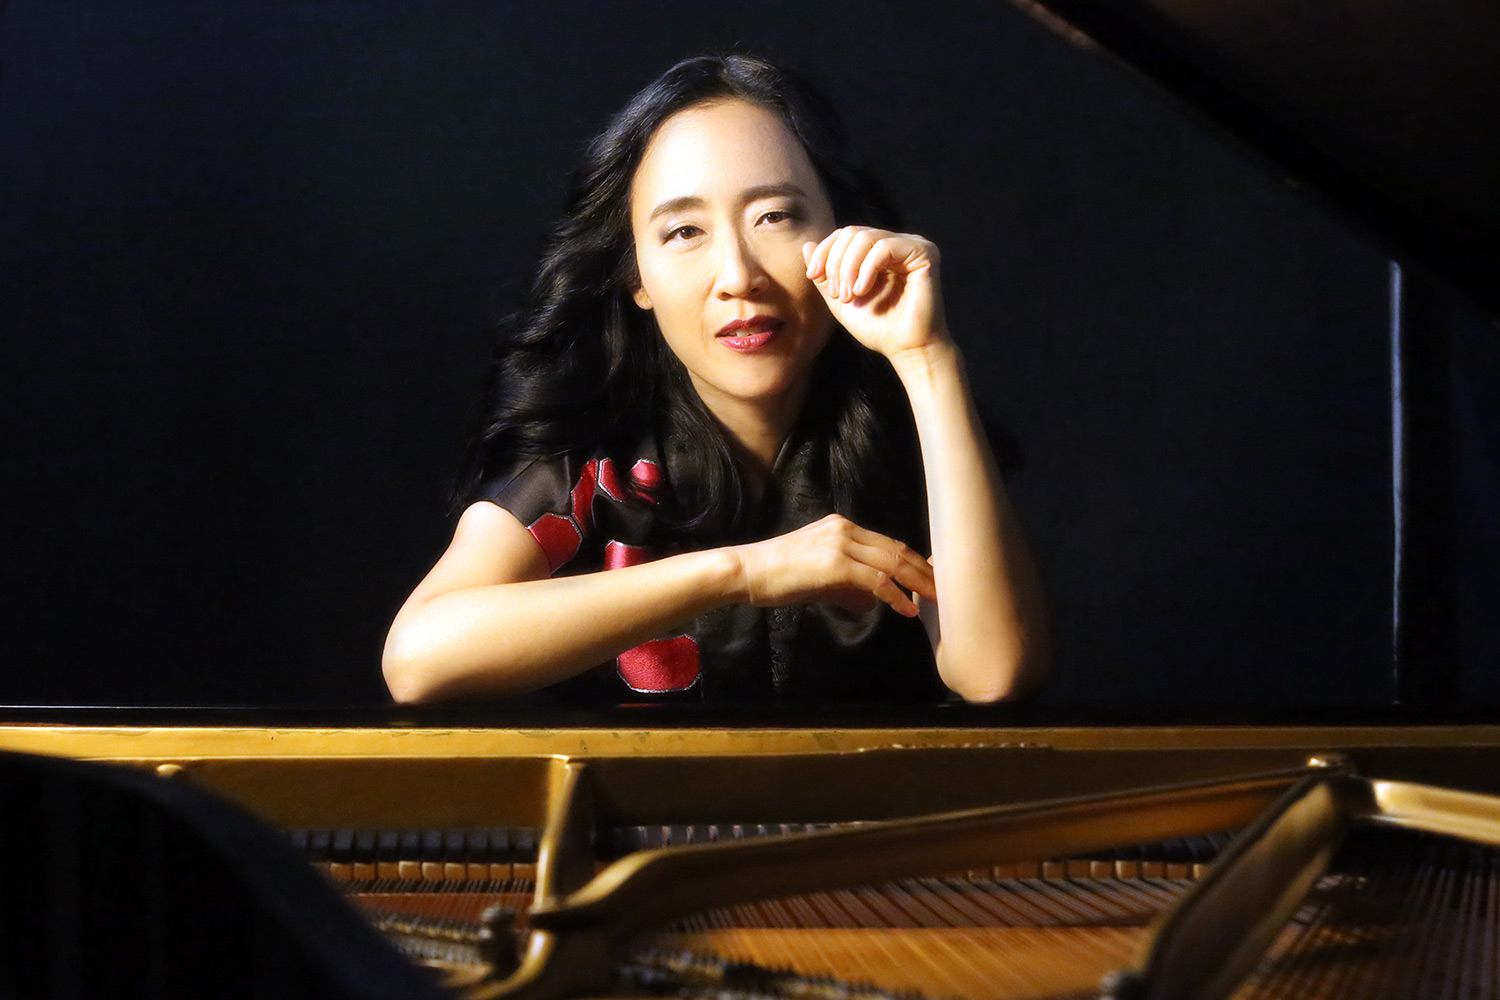 Helen Sung leaning on a piano